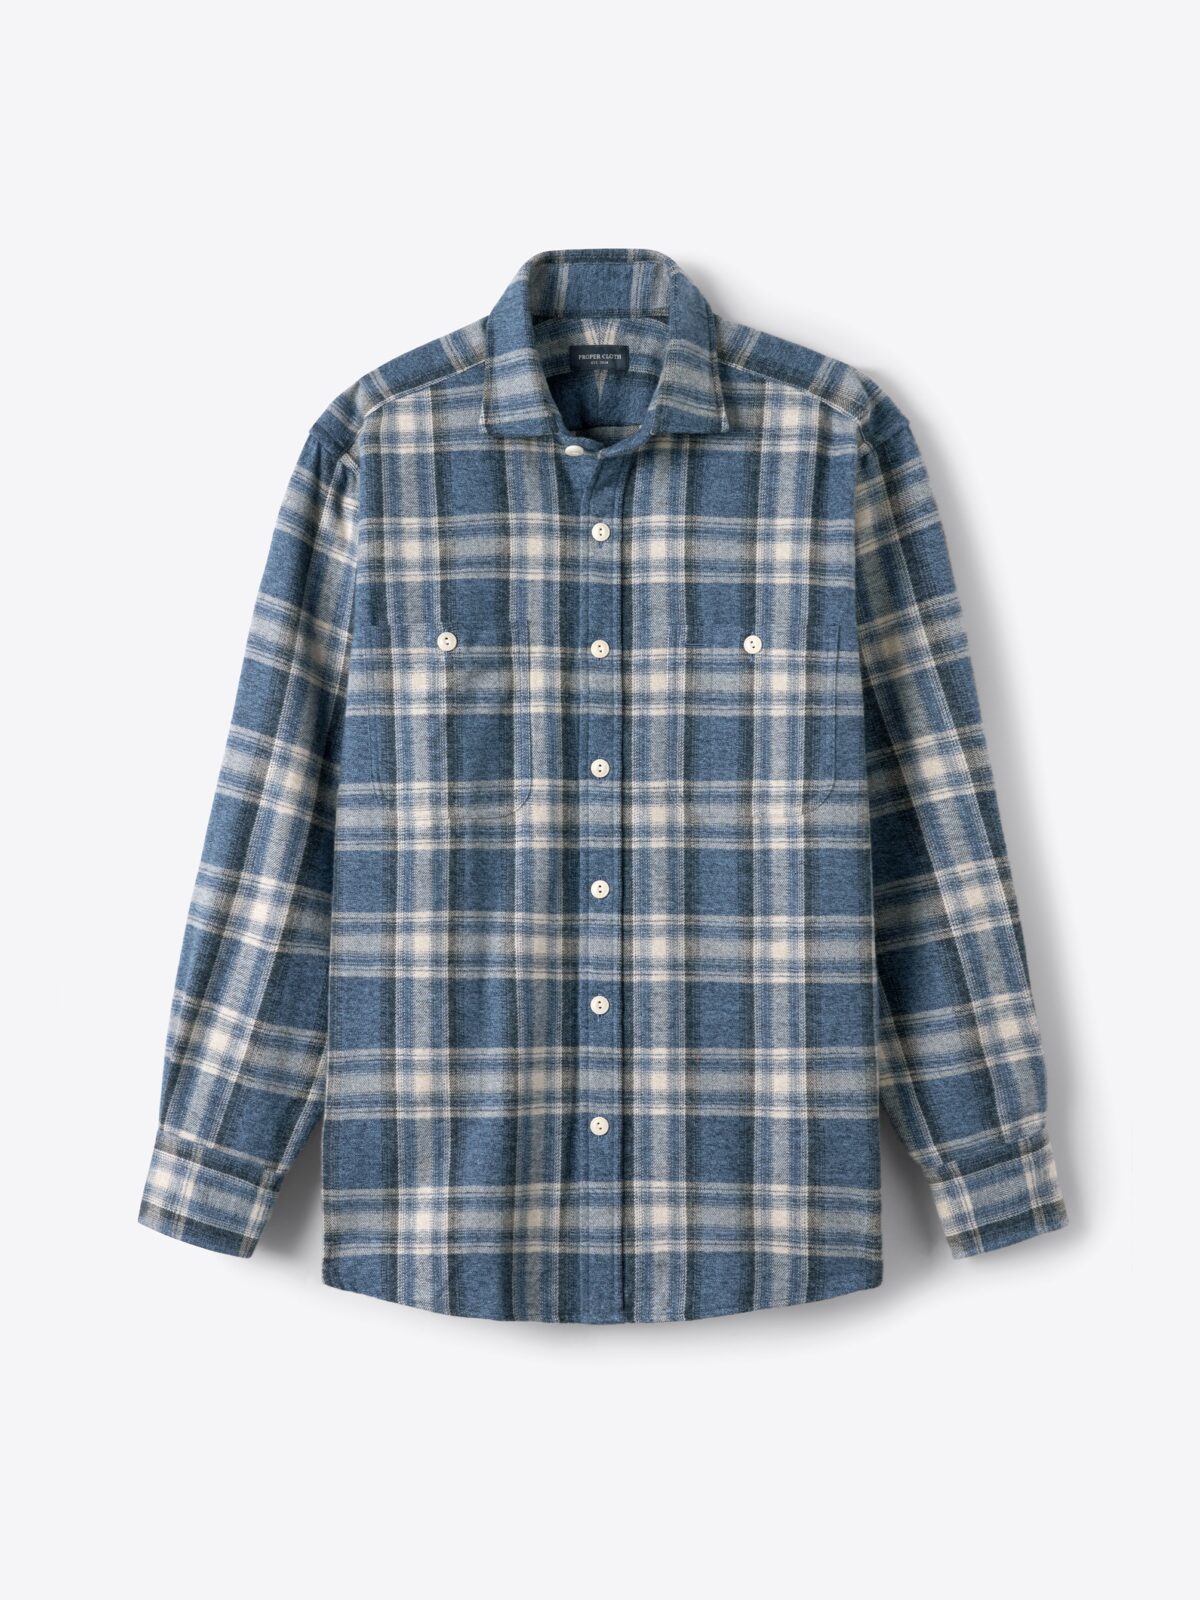 Japanese Blue Large Ombre Plaid Flannel Shirt by Proper Cloth